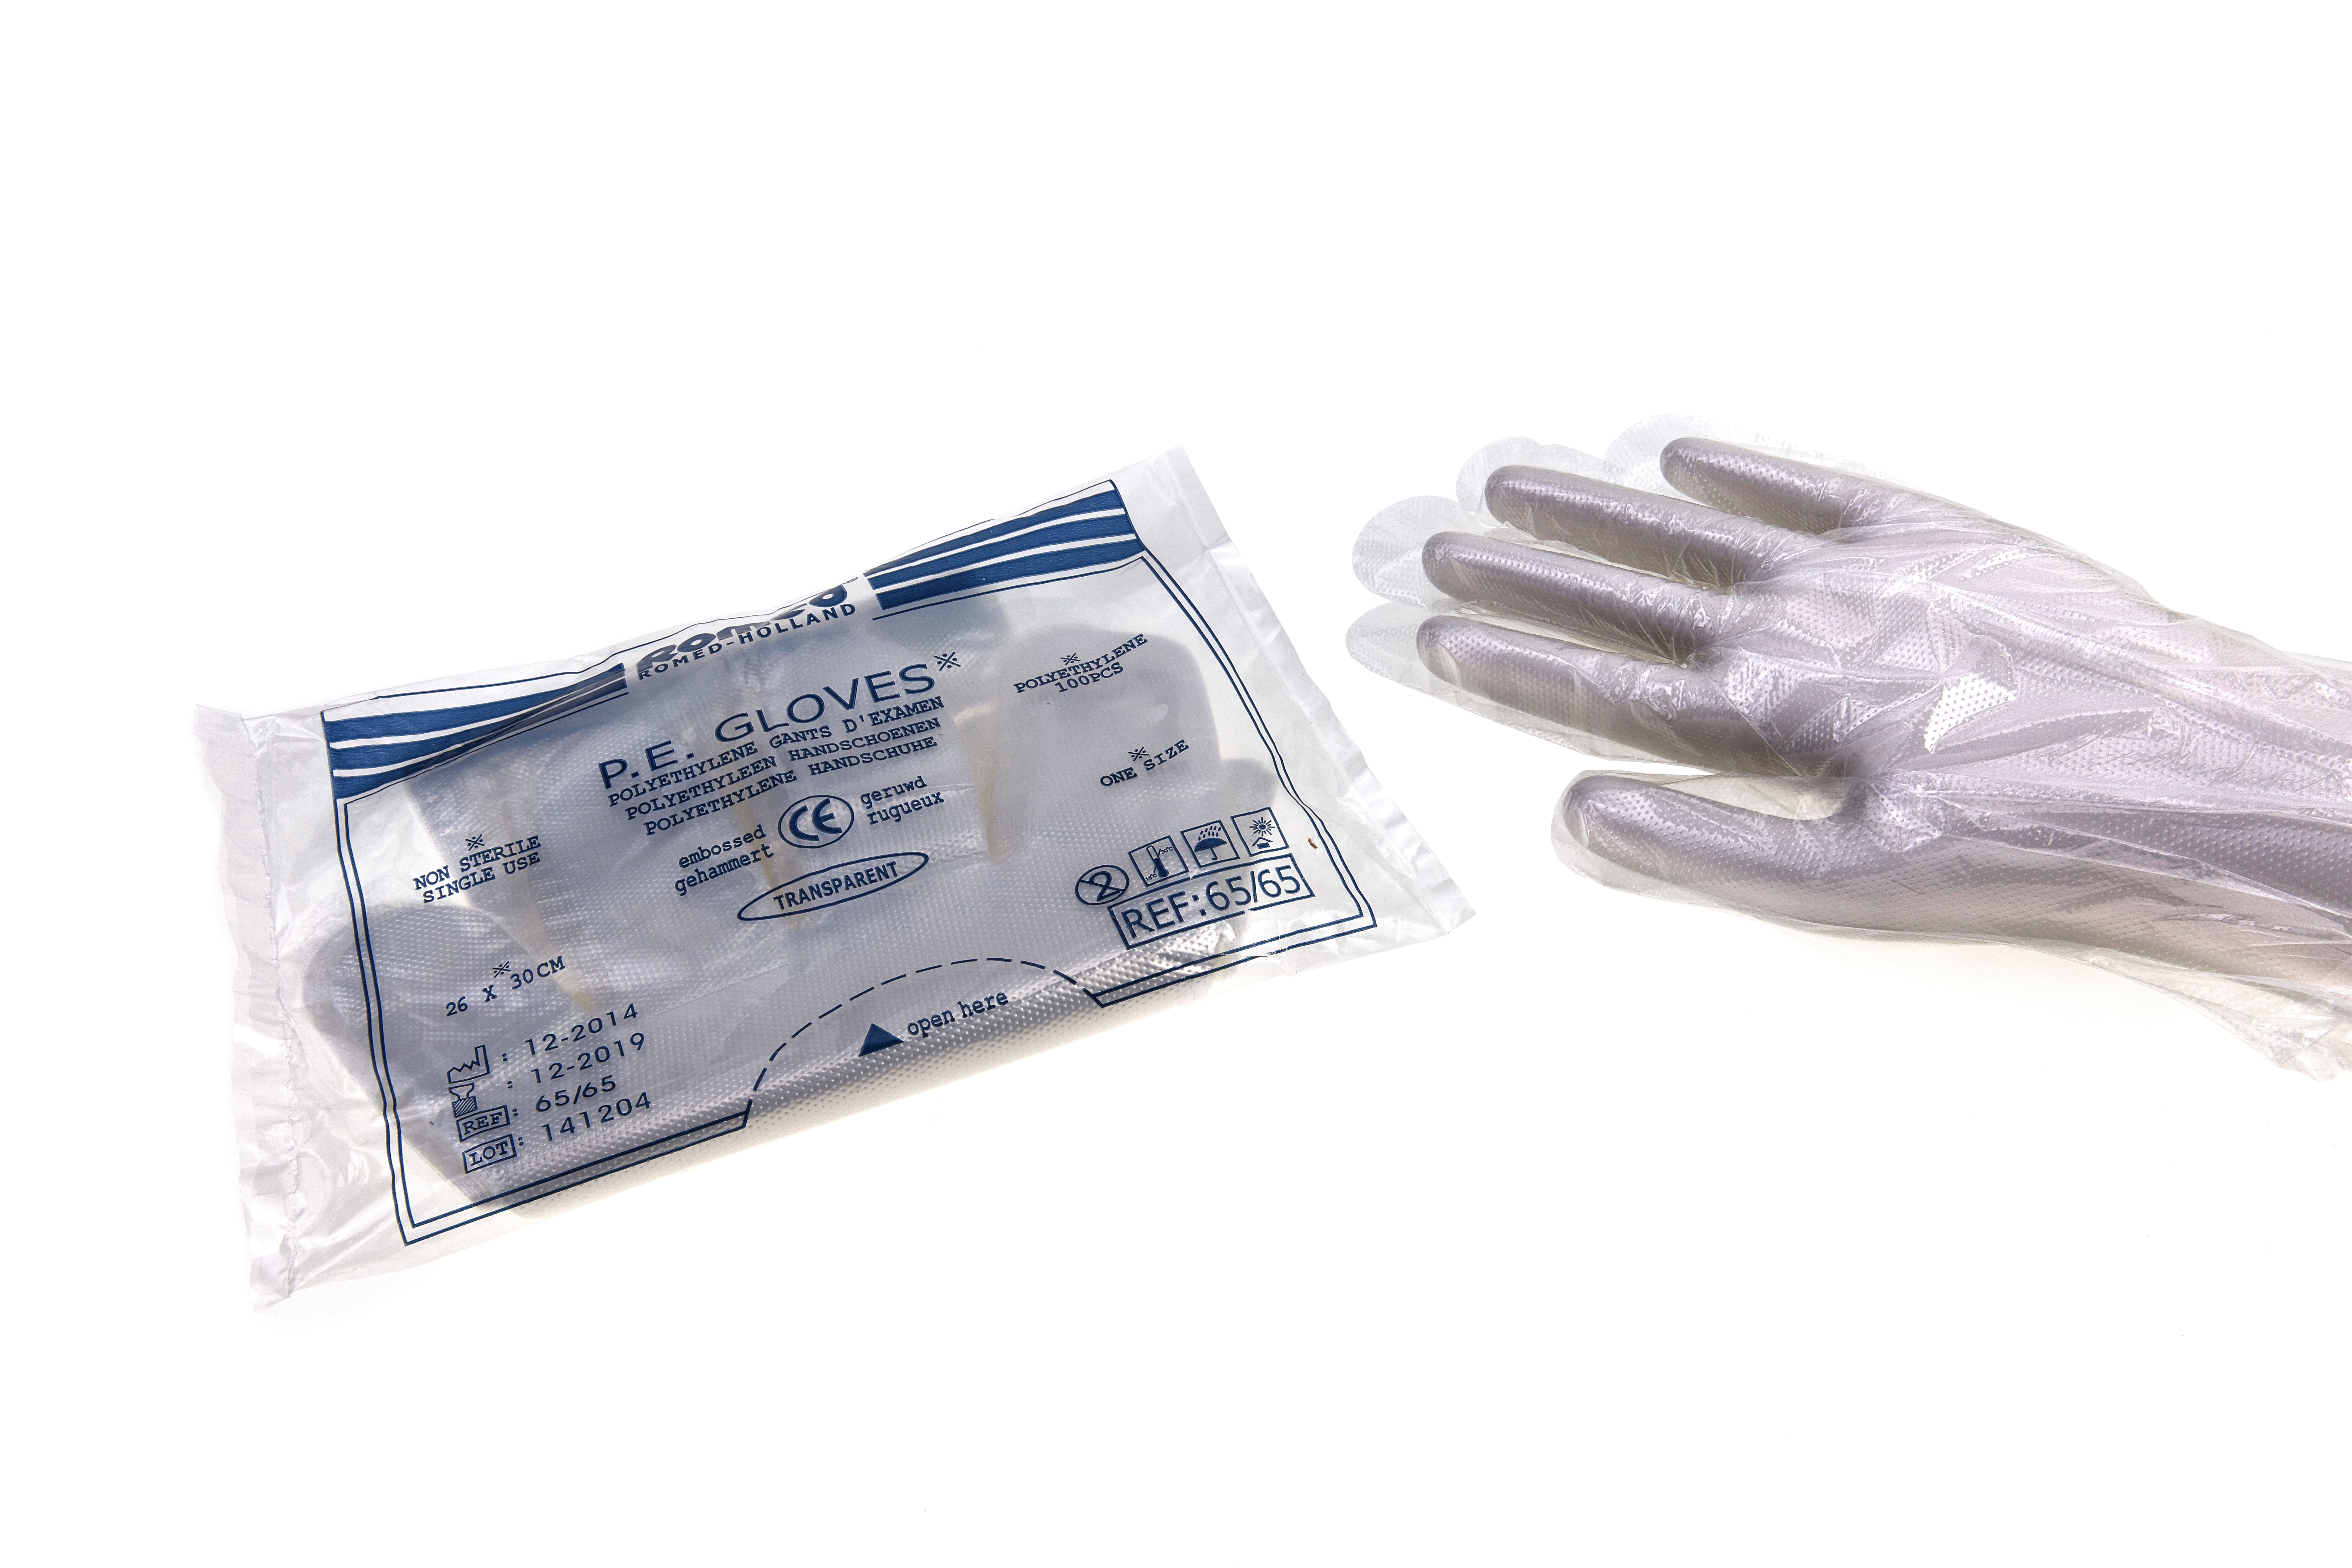 65/65 Romed polyethylene gloves+, non sterile, embossed, extra strong, 100 pcs in a polybag, 100 x 100 pcs = 10.000 pcs in a carton.